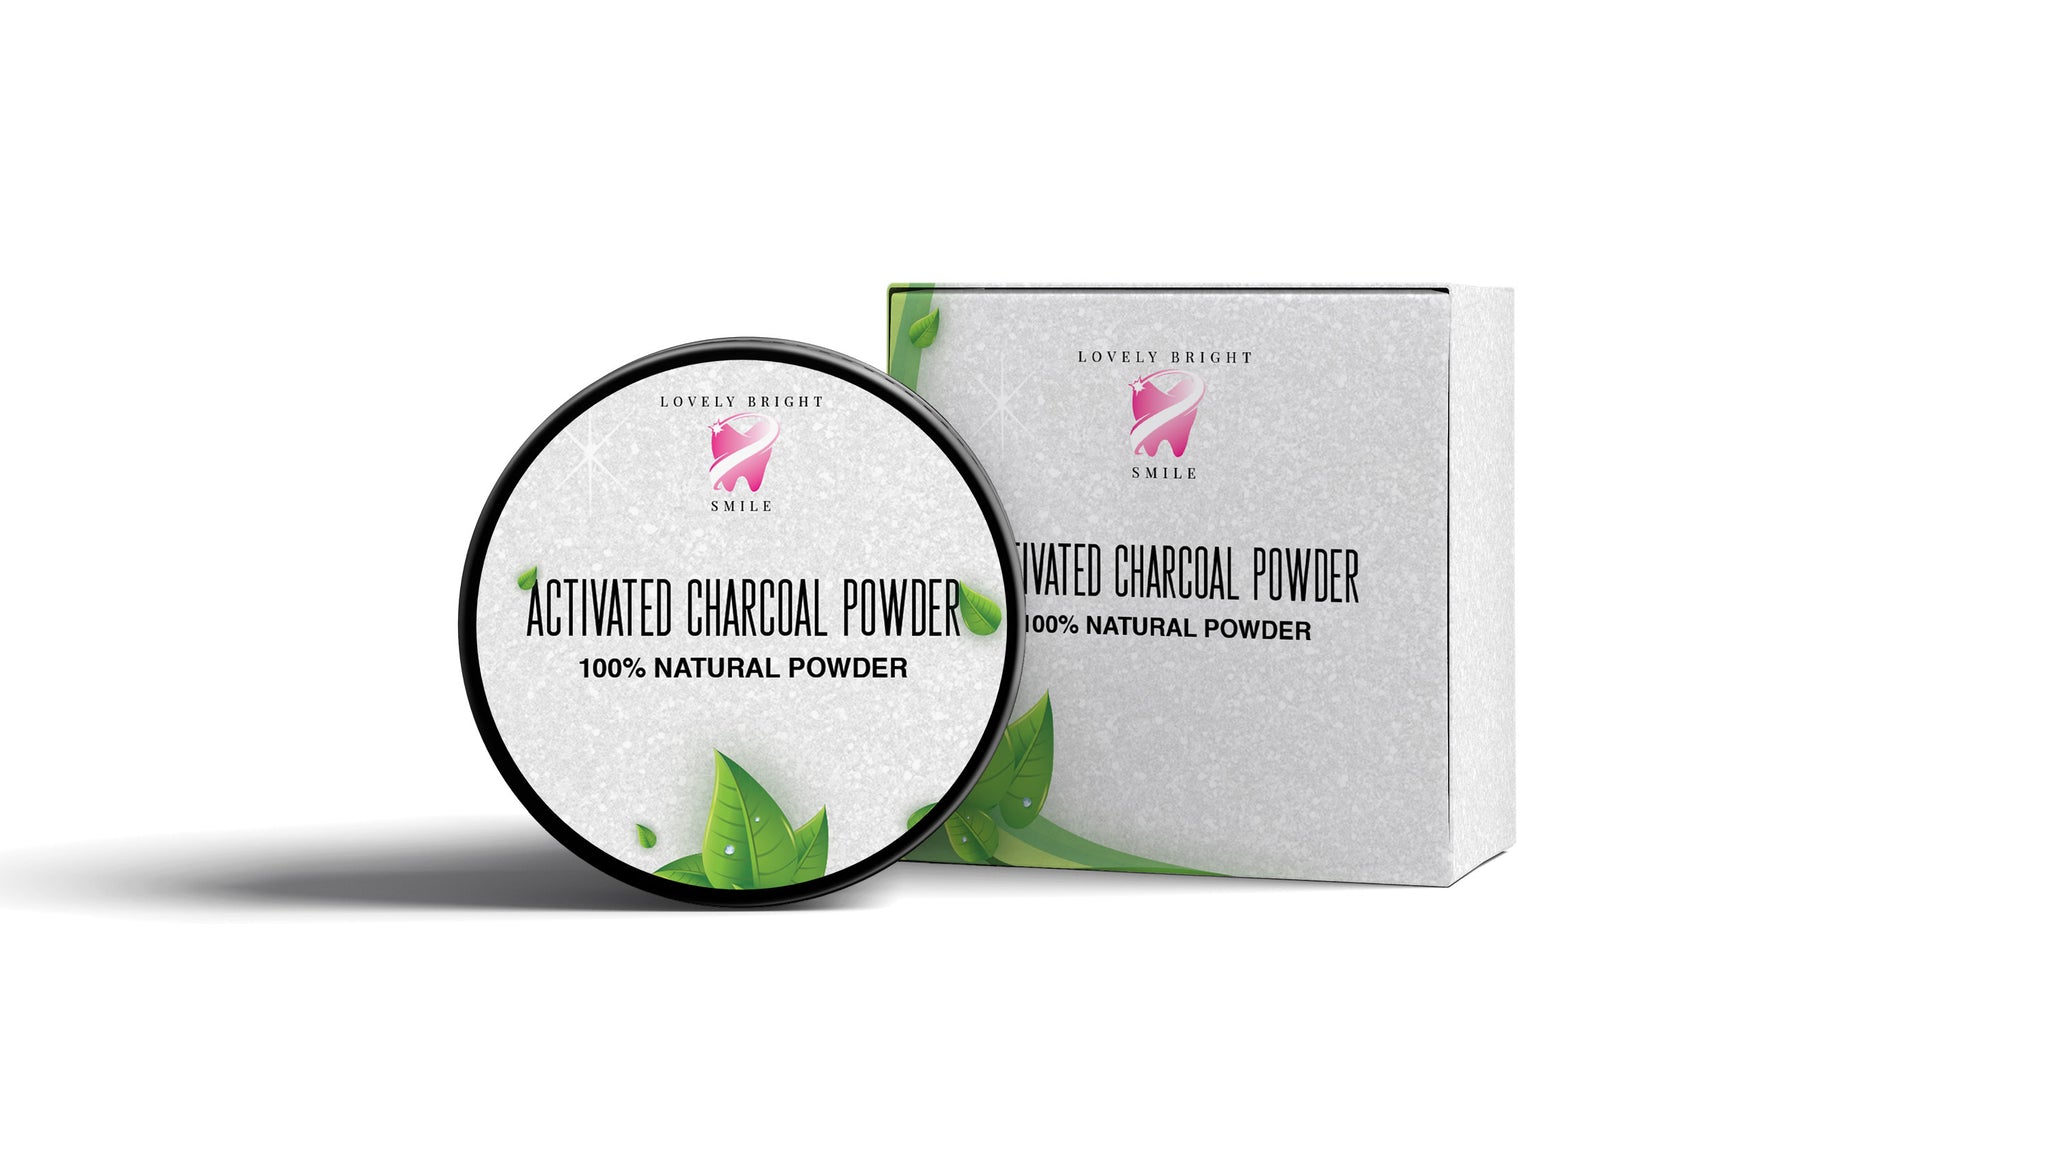 Activated Charcoal Powder Teeth Whitening Organic 100% Natural